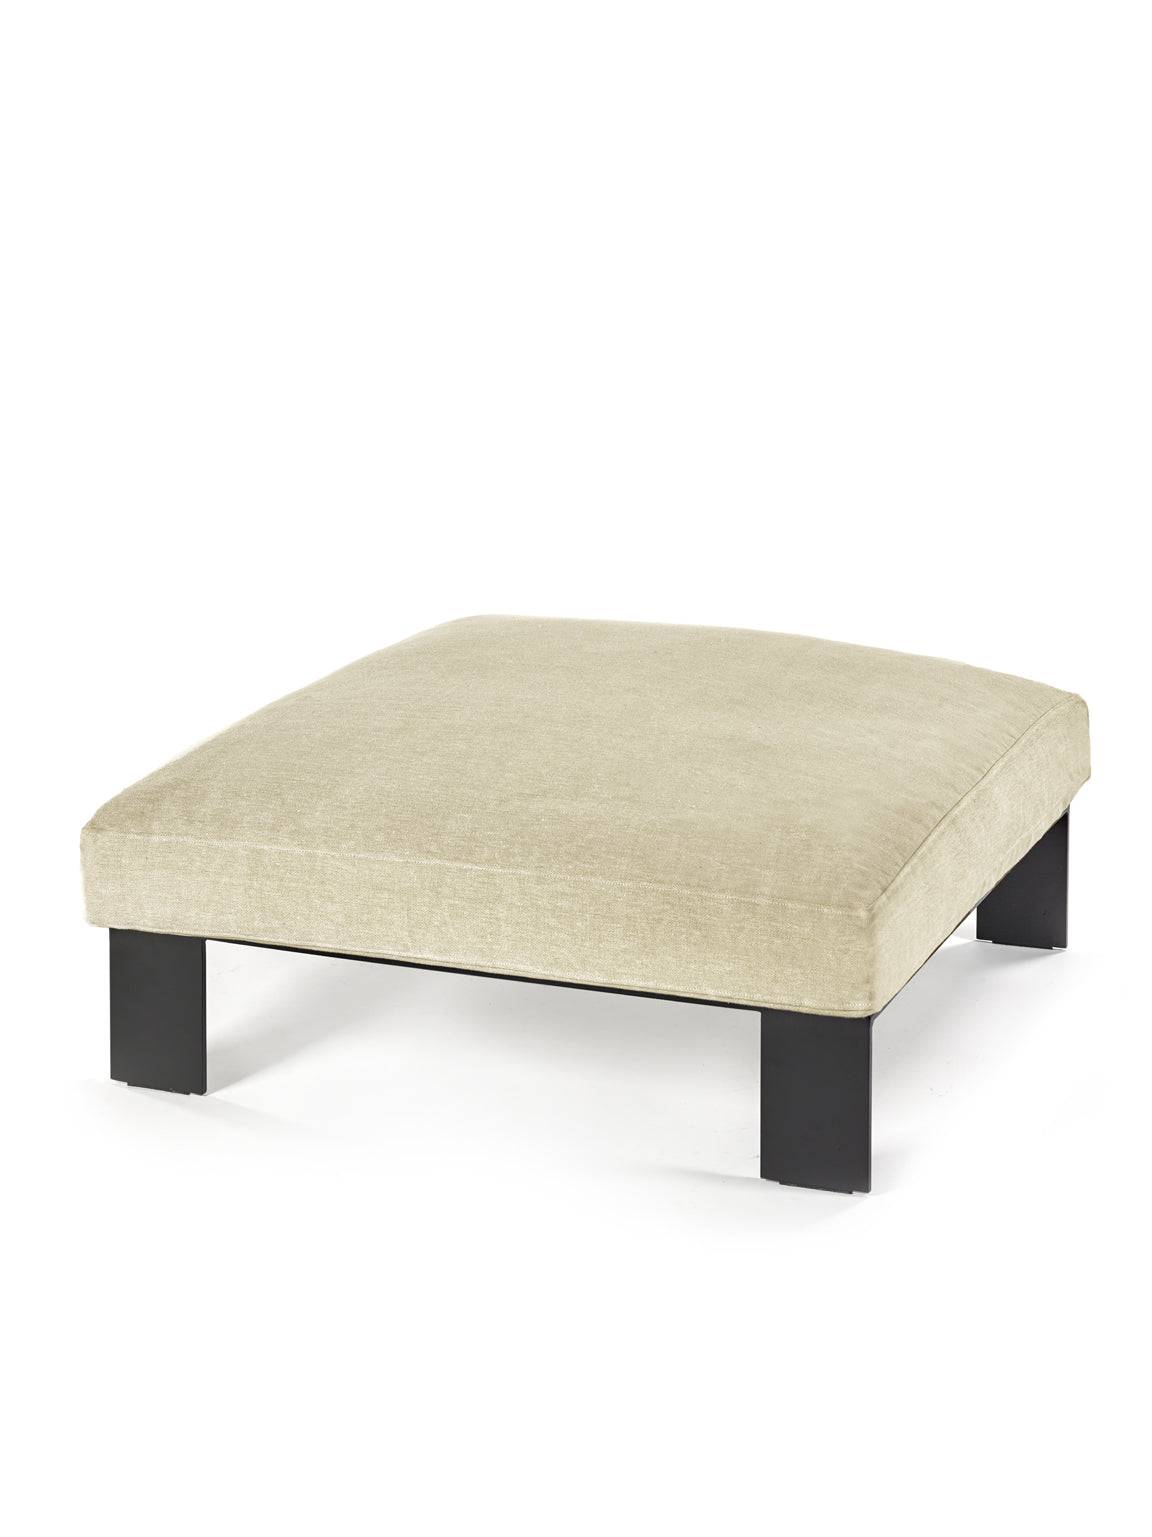 Mombaers Ottoman - Natural - THAT COOL LIVING